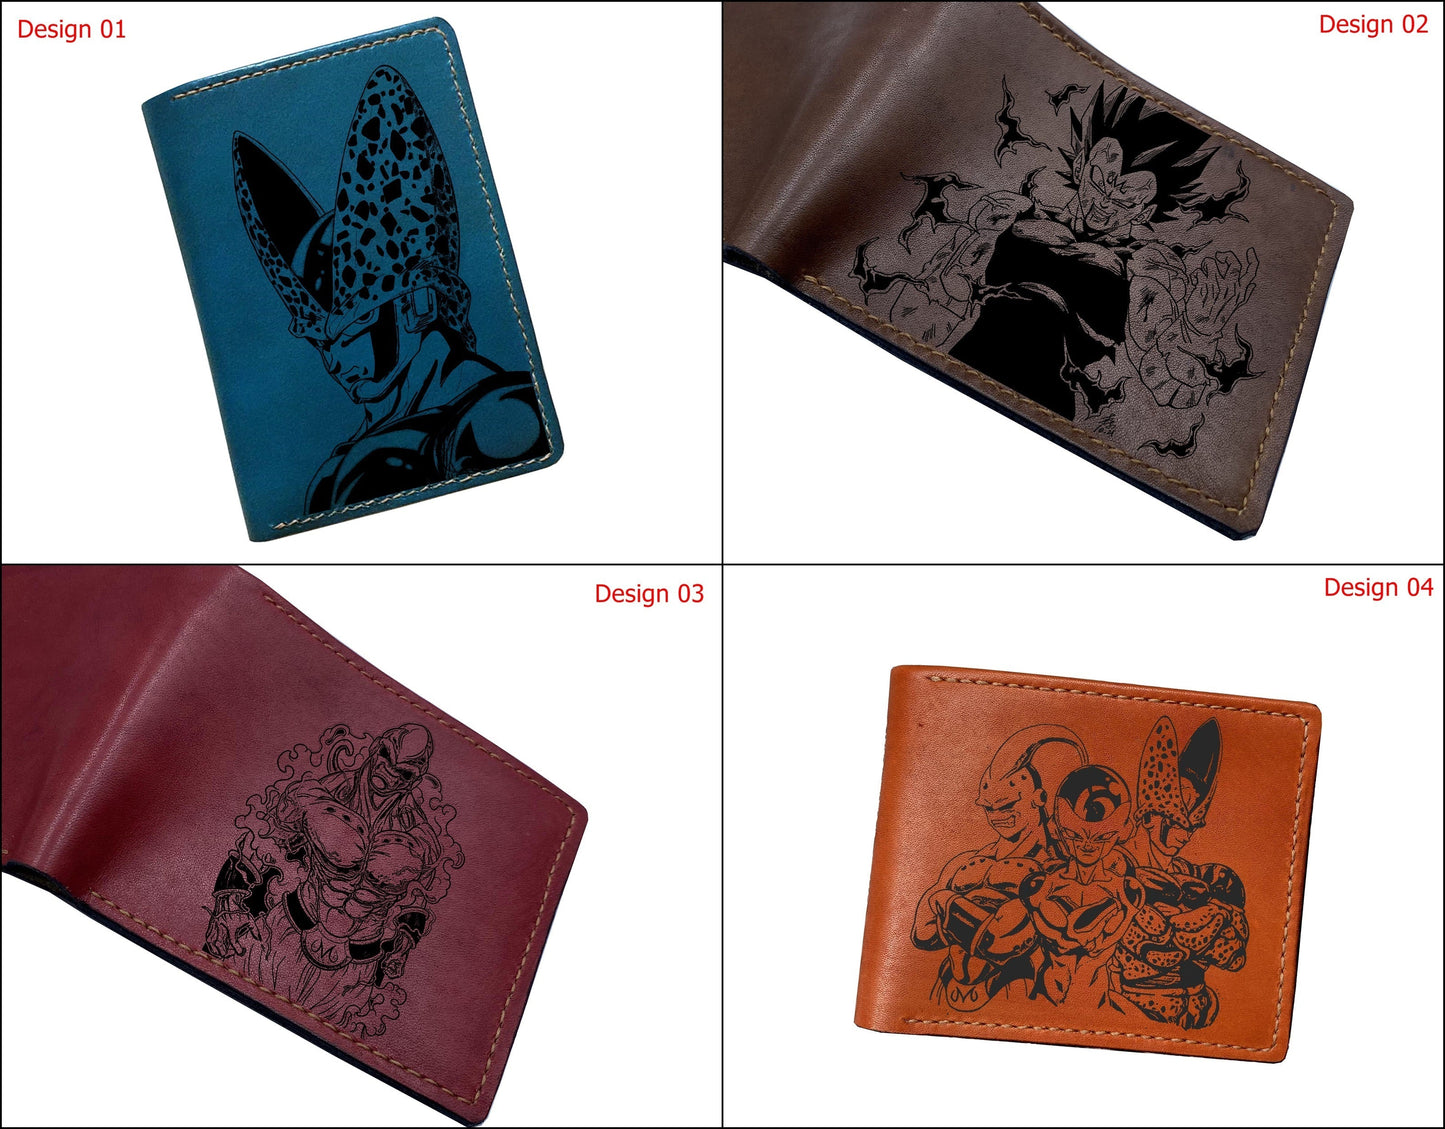 Mayan Corner - Dragon ball characters drawing leather wallet, fan art leather gift for men, wallet for him, leather anniversary present ideas -  Master Roshi